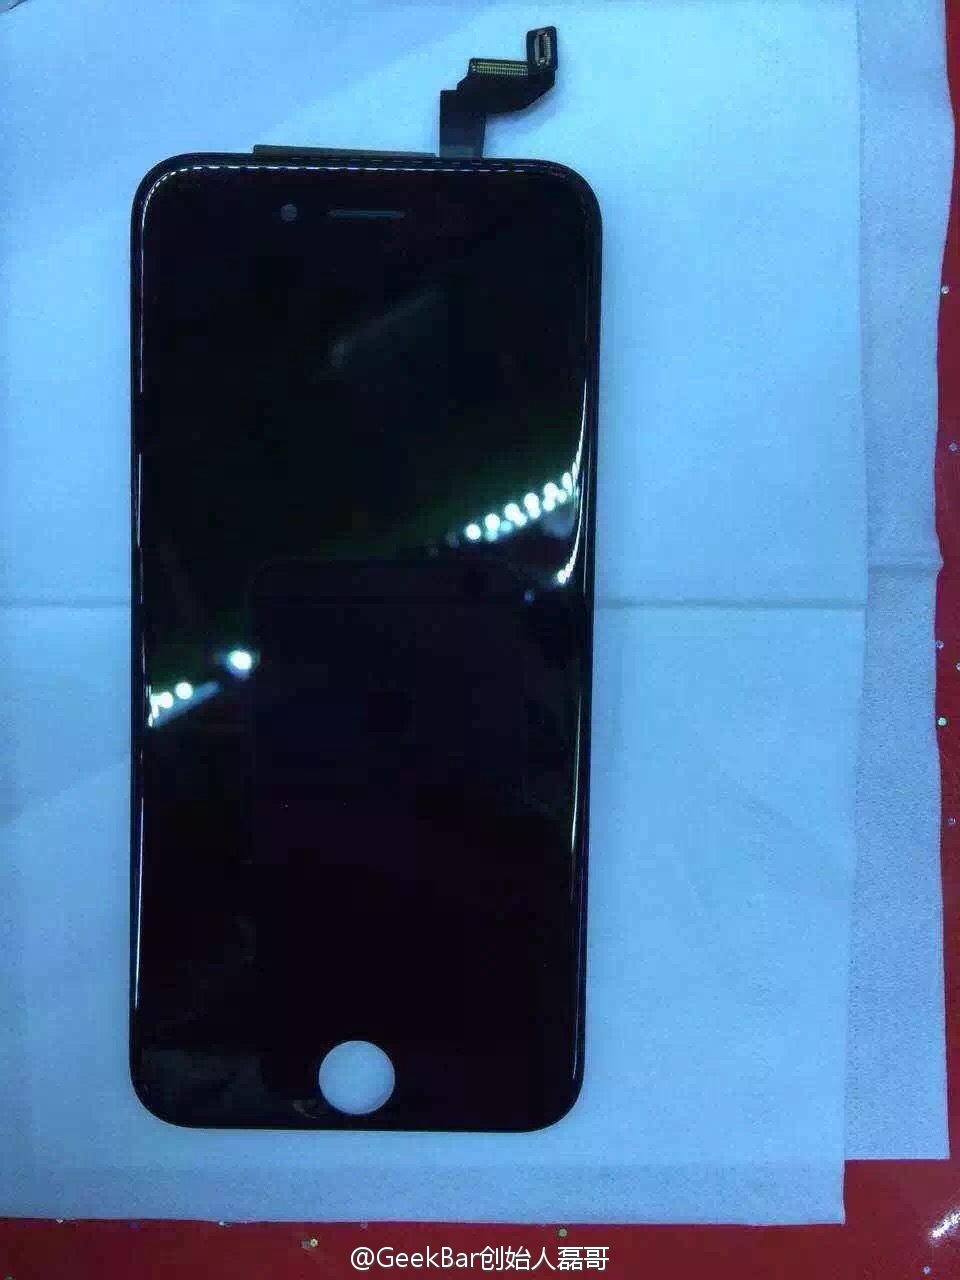 First Photos of the iPhone 6s Force Touch Display Leaked?